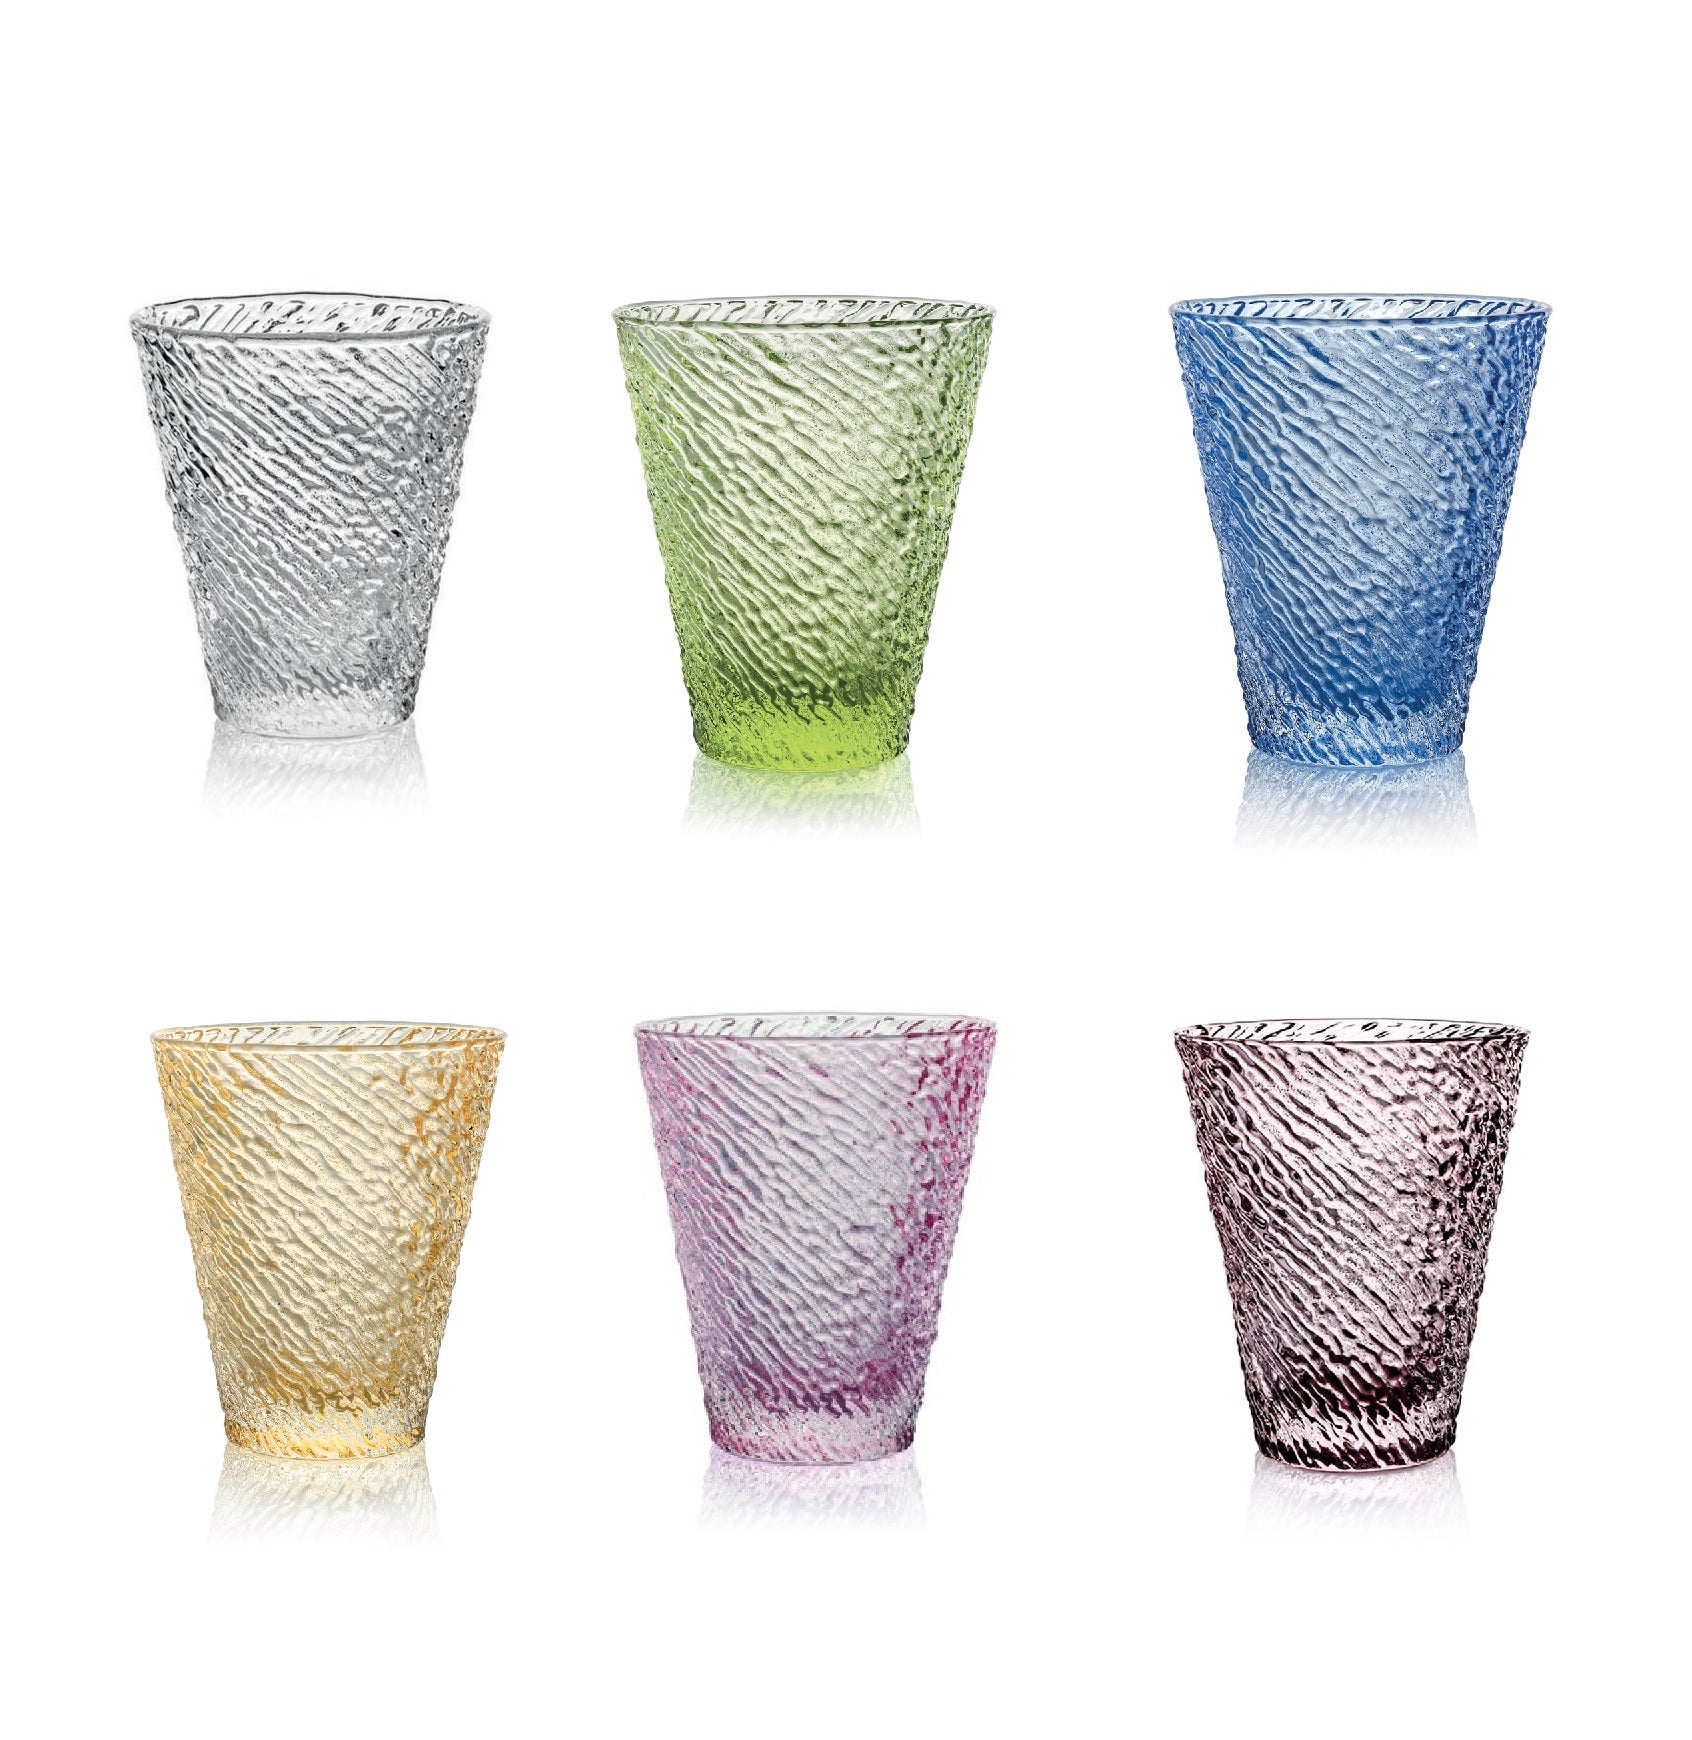 IVV Iroko Set 6 Water Glasses assorted colors, 30 cl